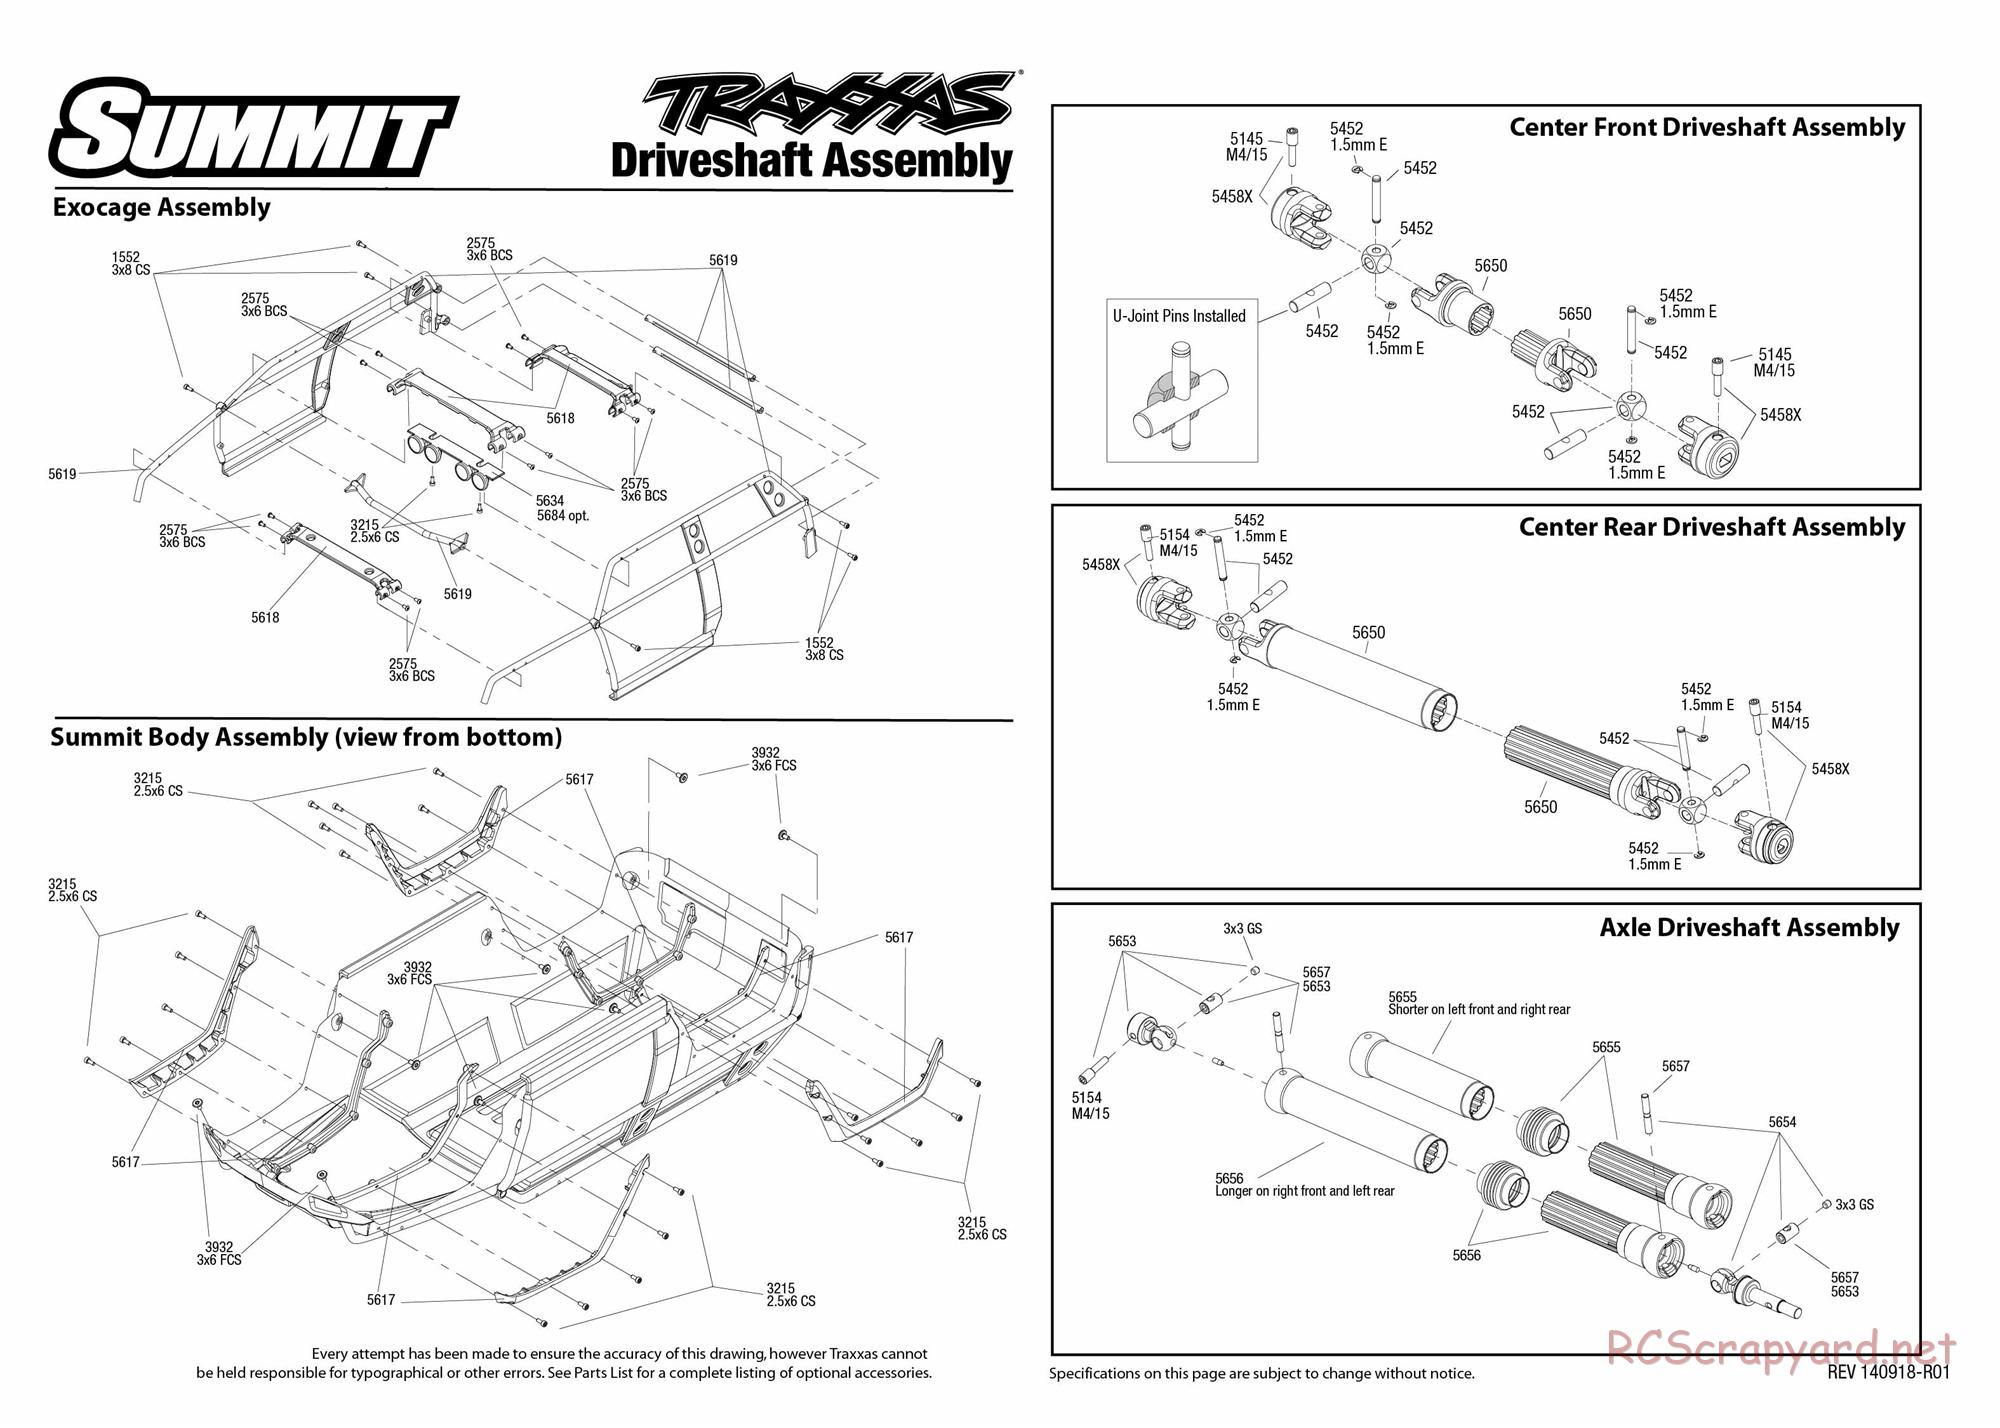 Traxxas - Summit (2014) - Exploded Views - Page 1